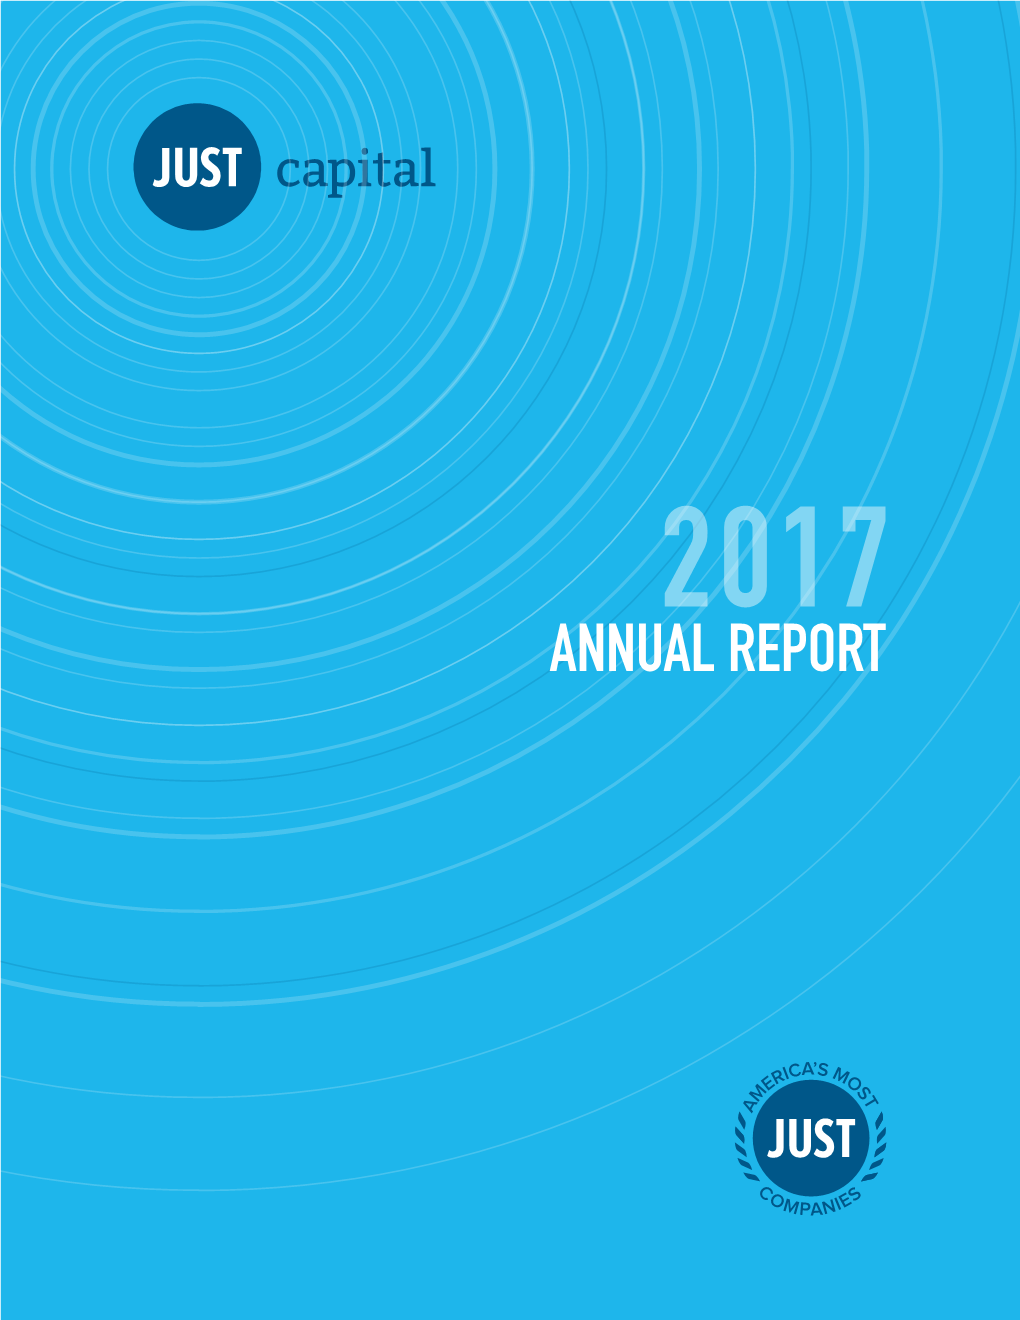 2017 Annual Report | 1 Letter from Mar Tin Whittaker, Just Capital CEO